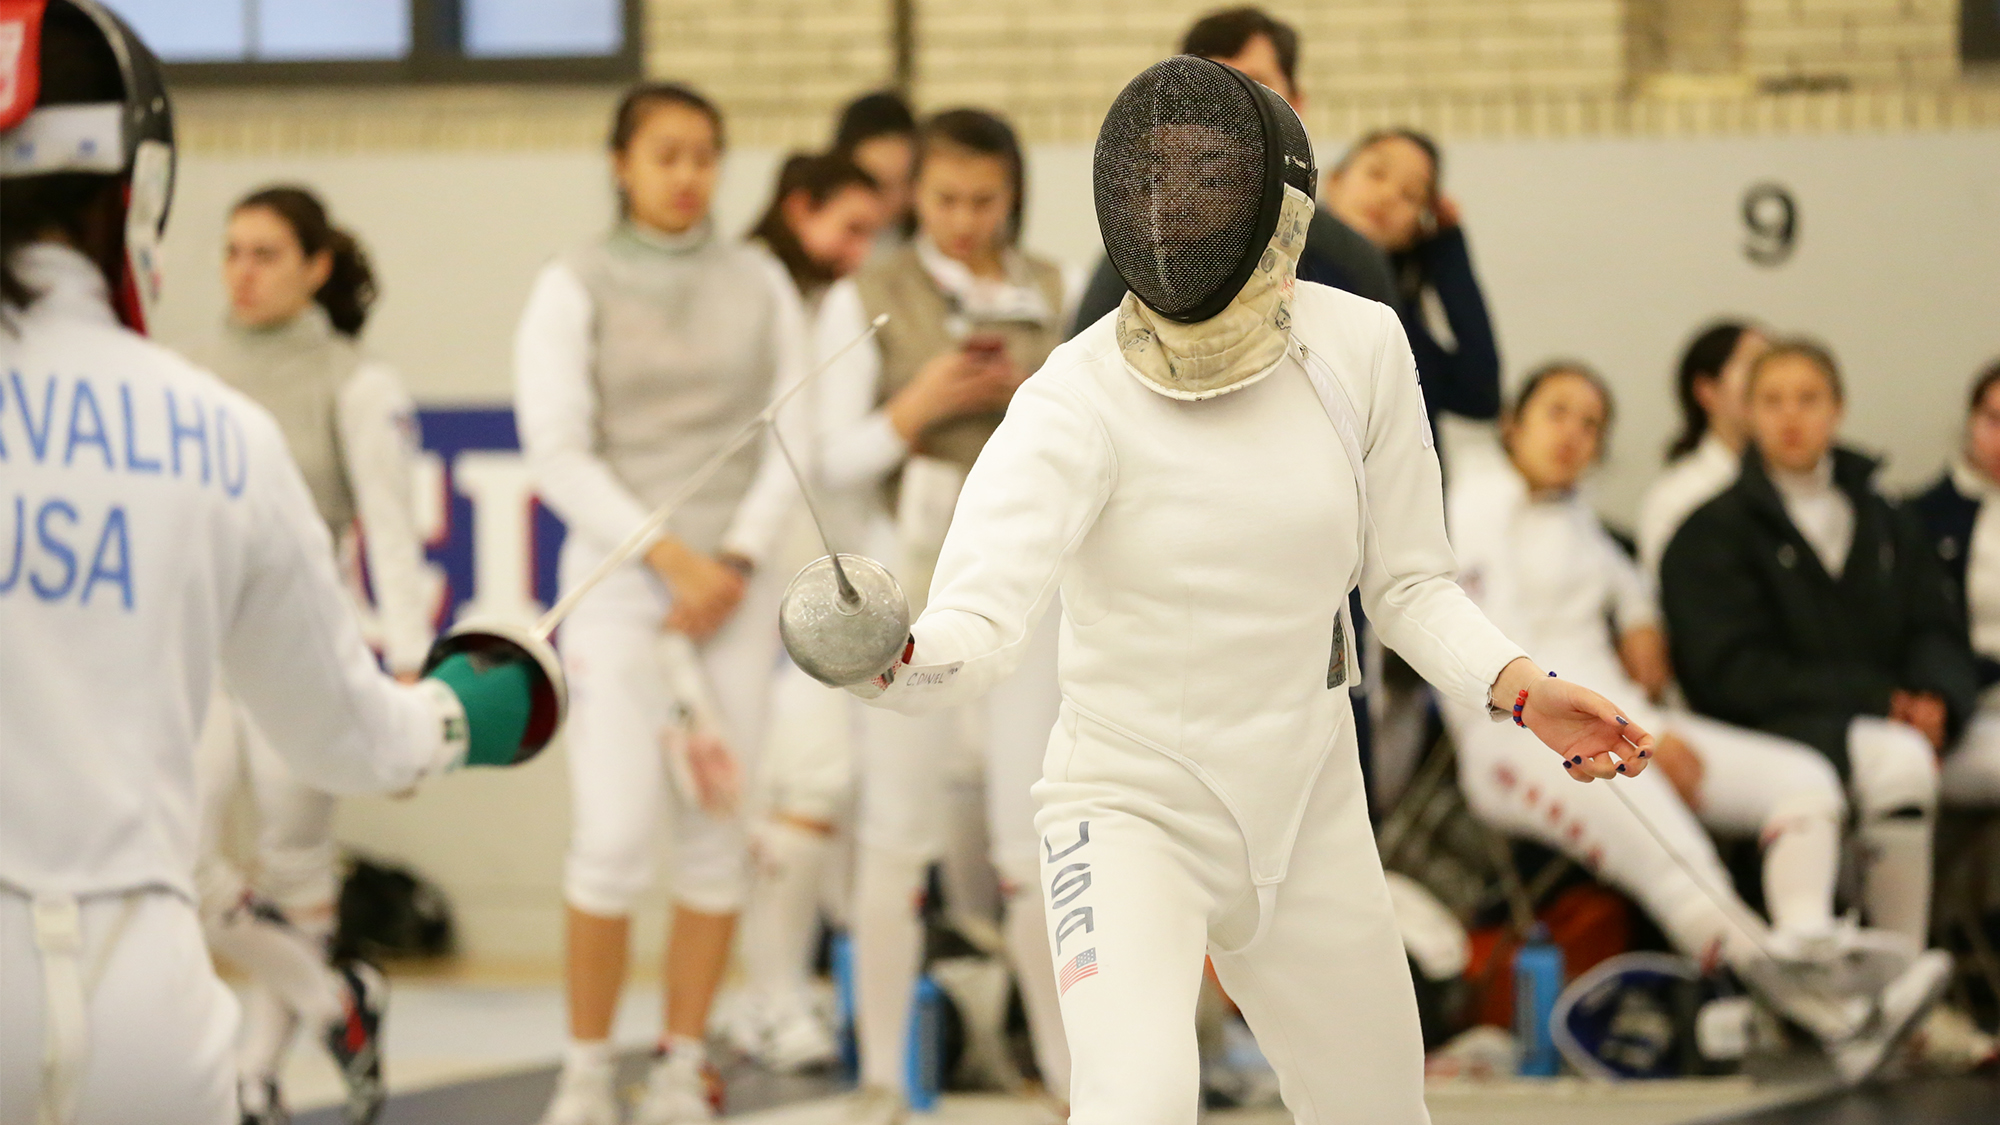 Freshman Chloe Daniel competes in a fencing duel while wearing protective clothing and holding her sword.